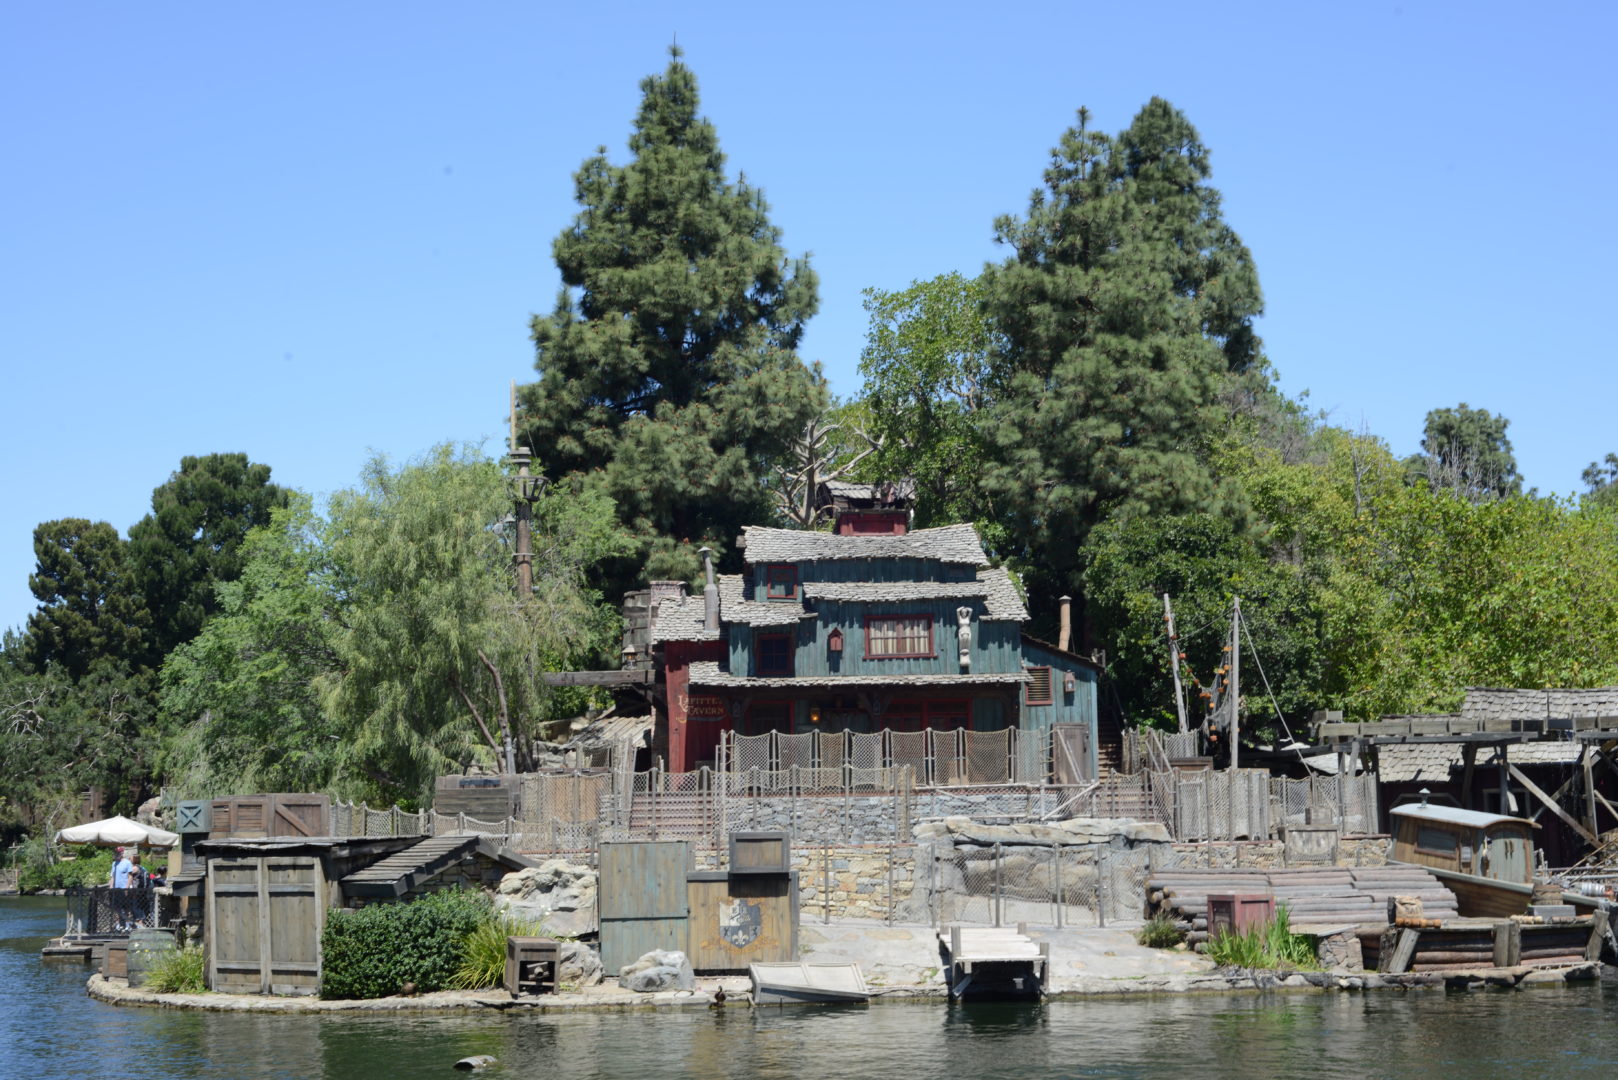 Pirate Lair on Tom Sawyer Island Surrounded by Rivers of America in Disneyland